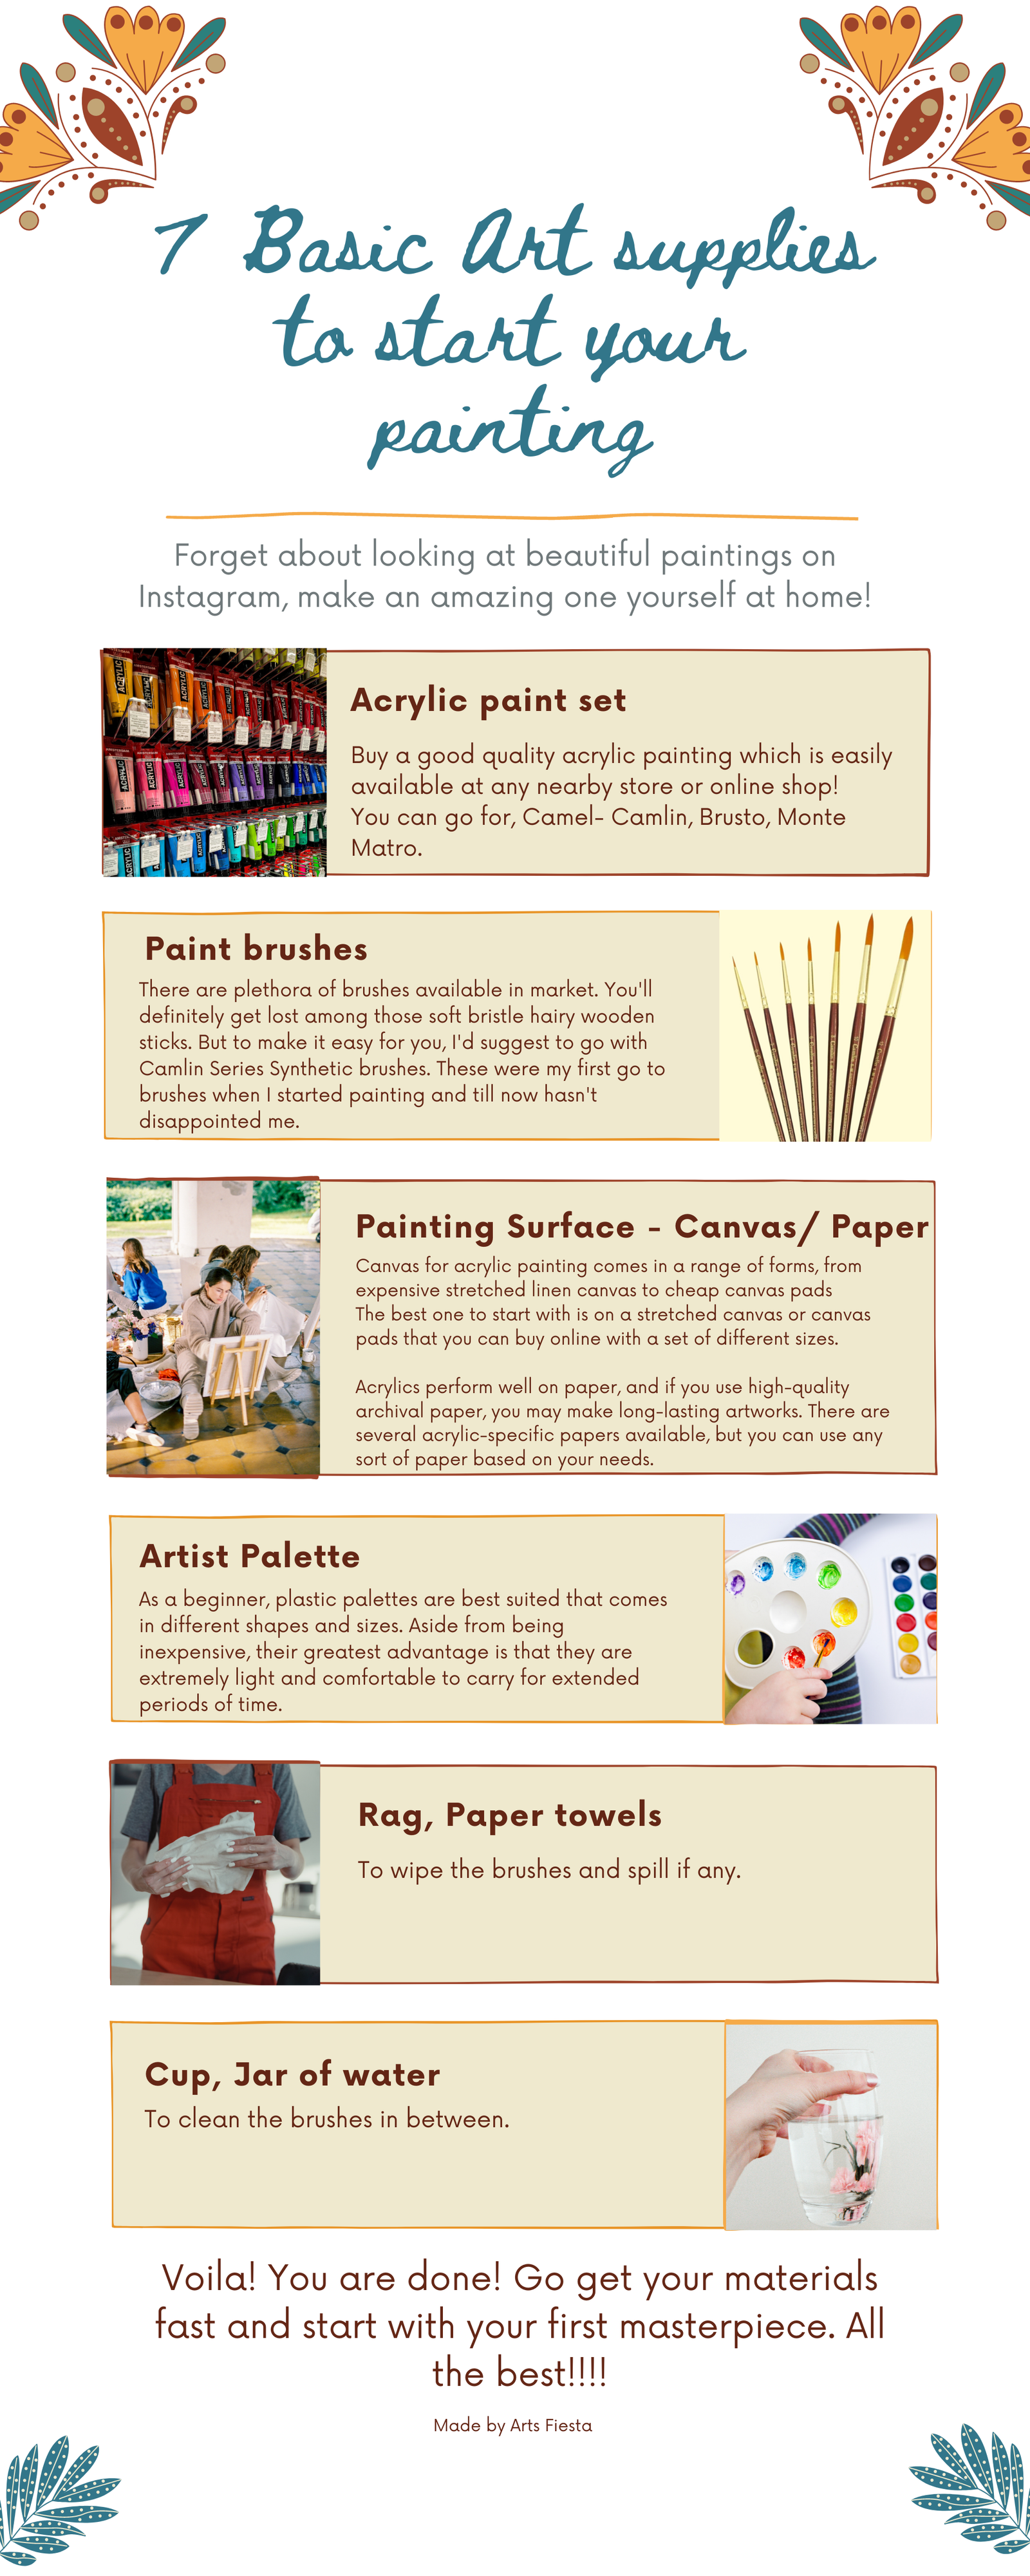 https://artsfiesta.com/wp-content/uploads/2022/07/7-Basic-Art-supplies-to-start-your-painting.png